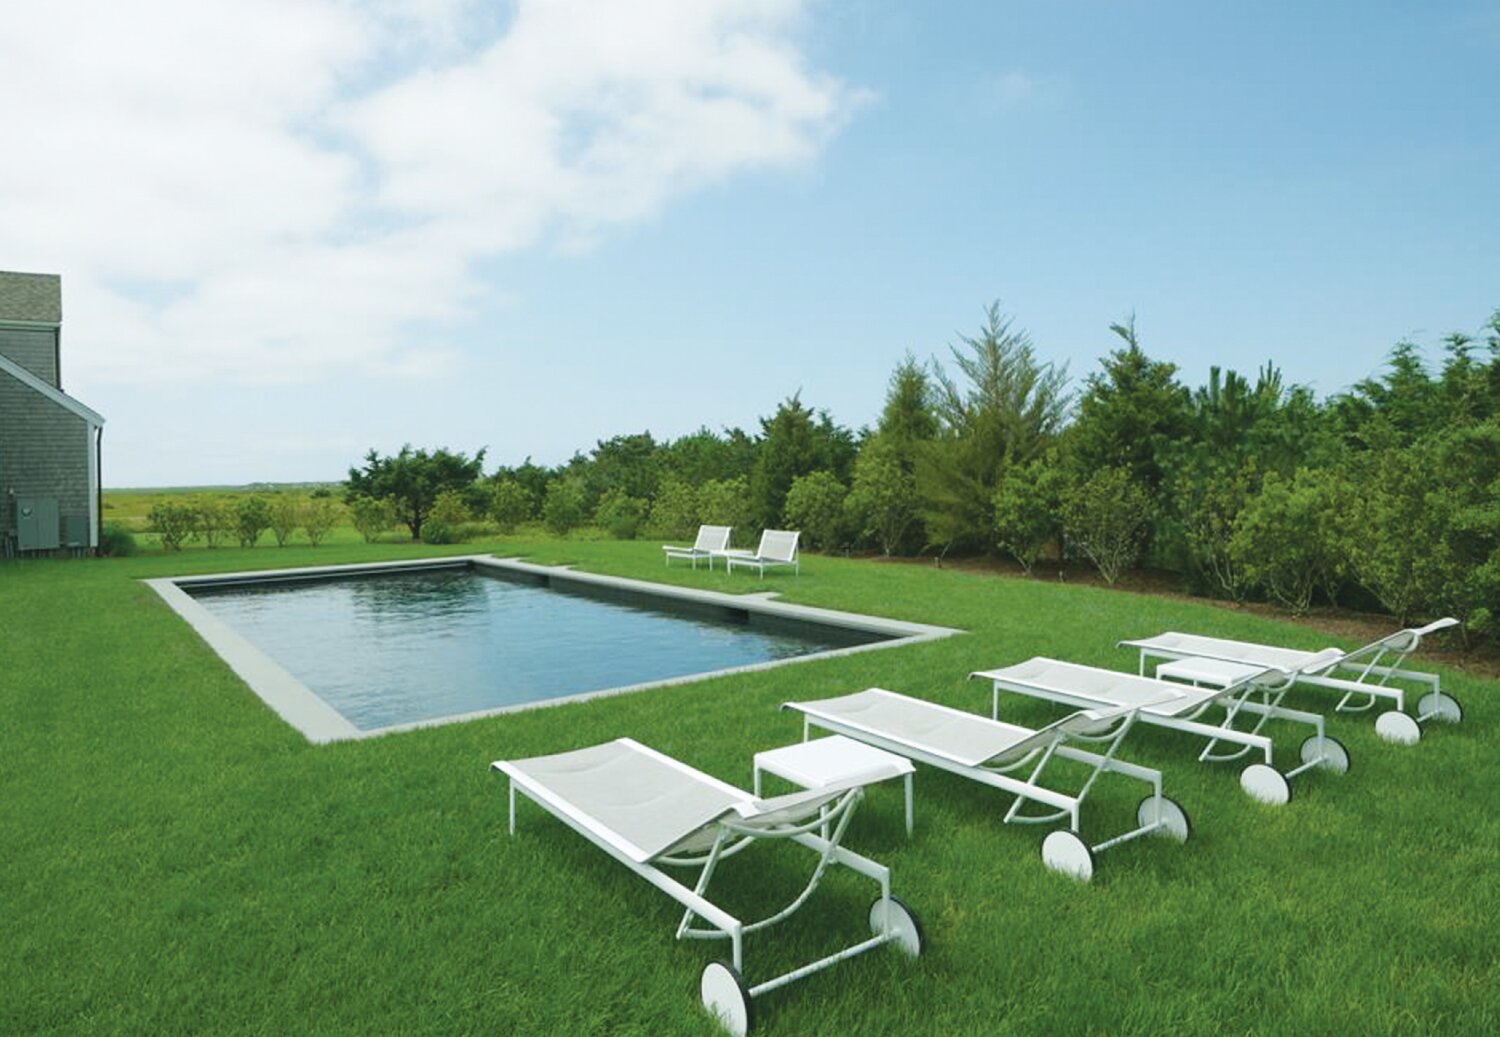 The in-ground pool is surrounded by the meticulously-manicured lawn, and just steps from the rear of the house.